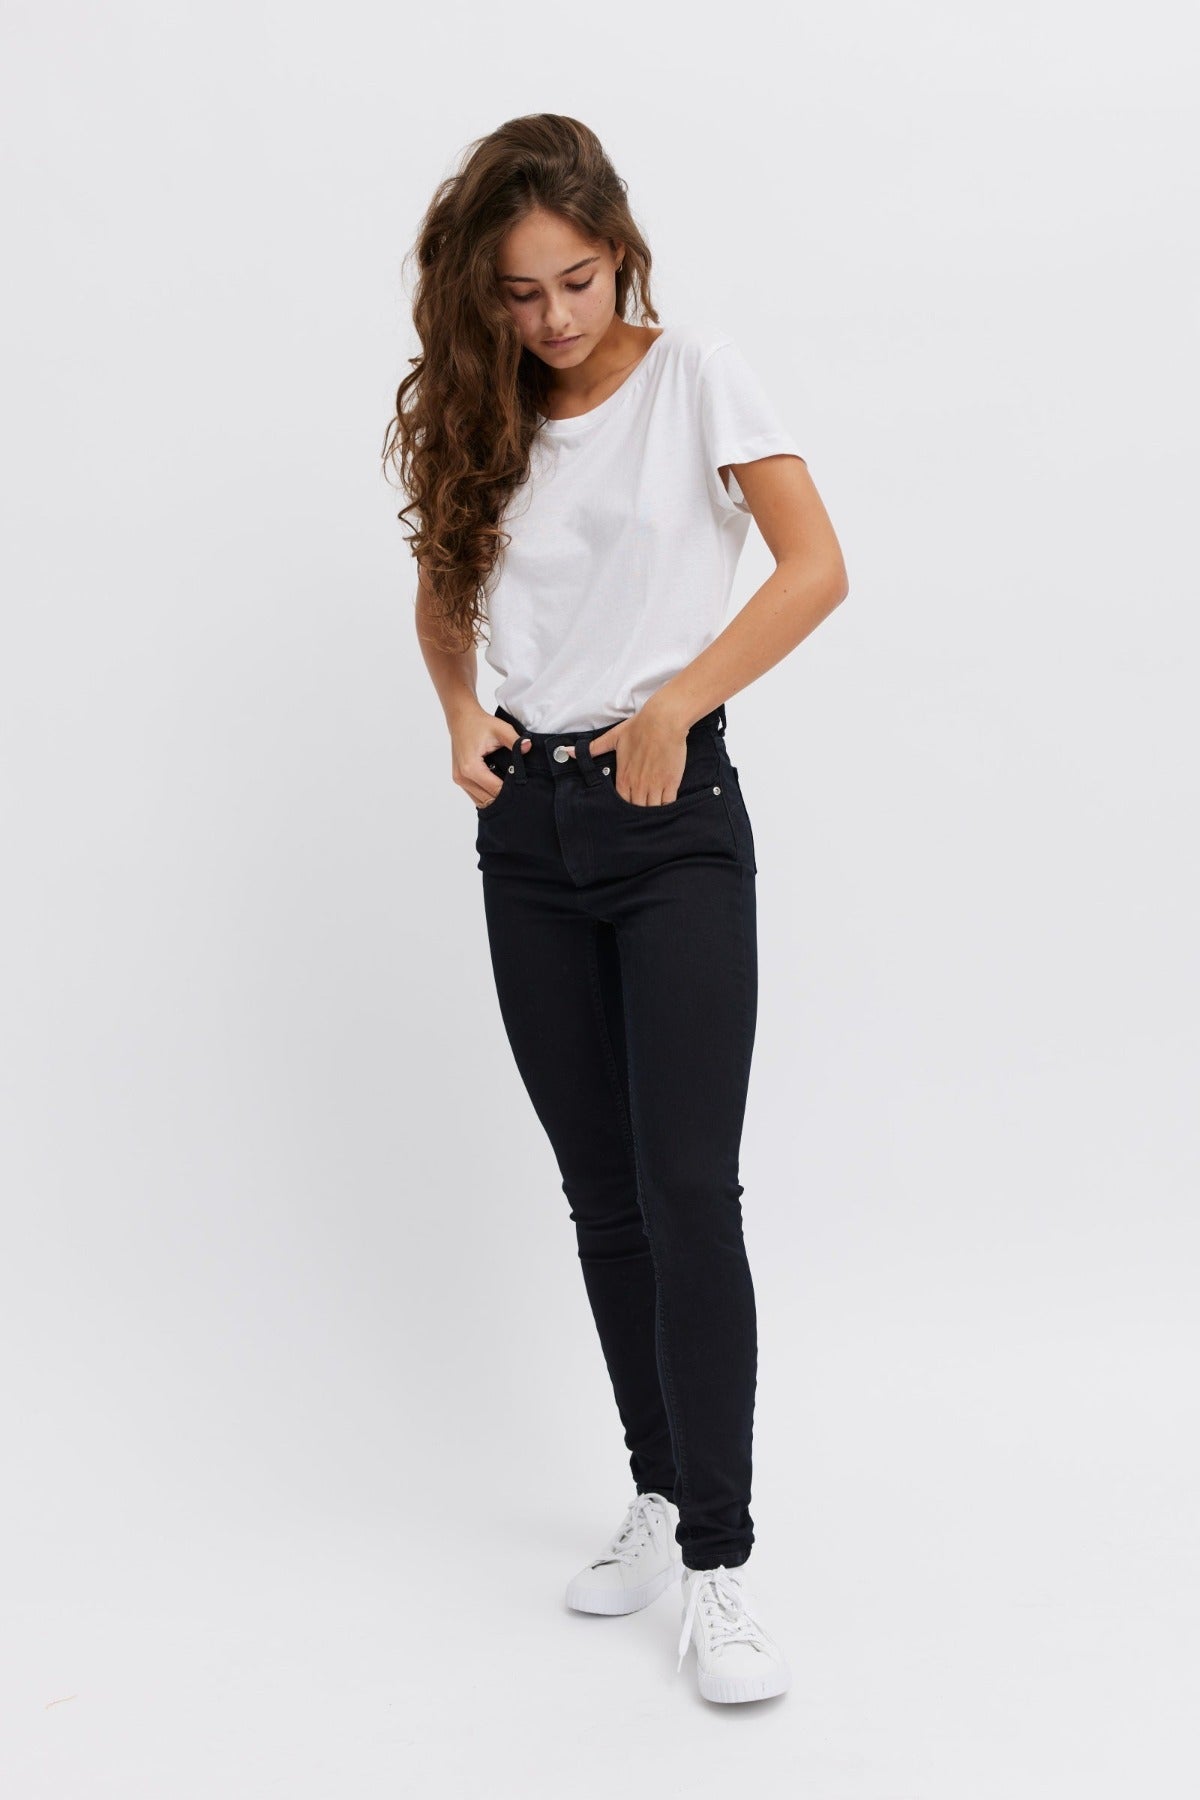 Comfortable black jeans for women